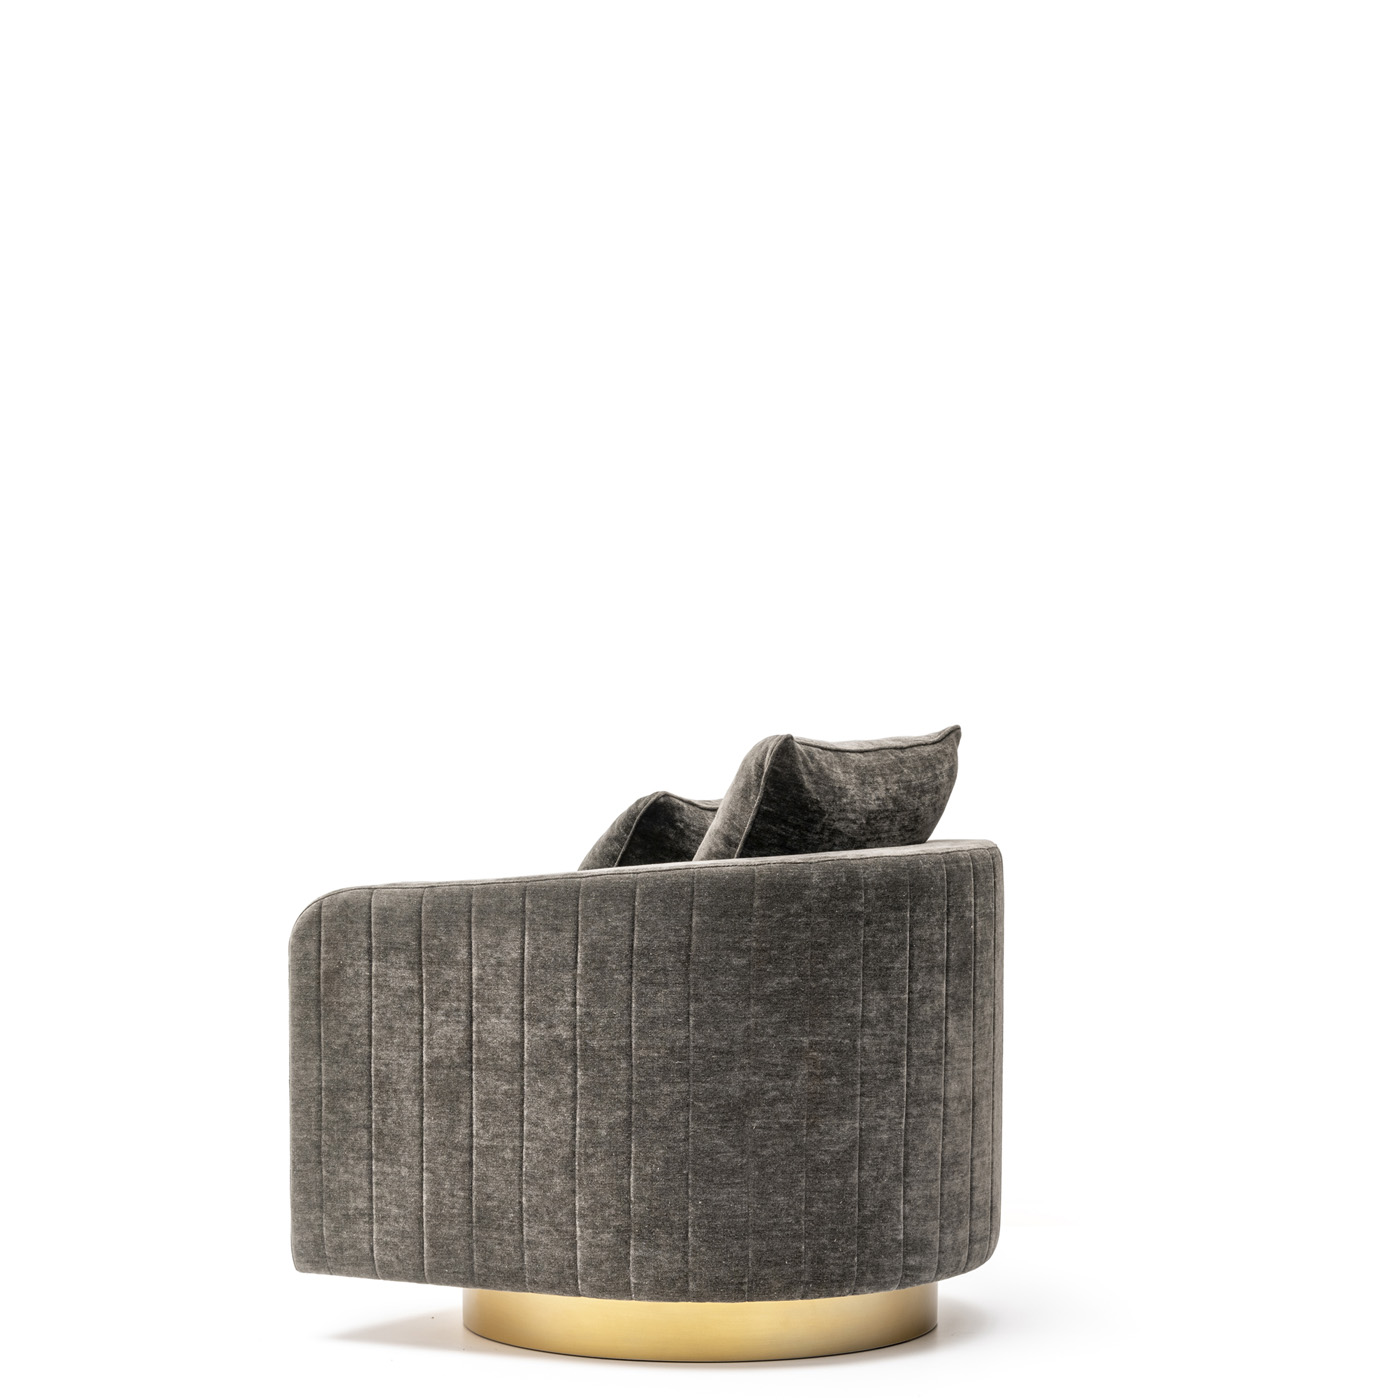 Sofas and seats - Afrodite armchair in Belsuede fabric with horn armrests - side view - Arcahorn